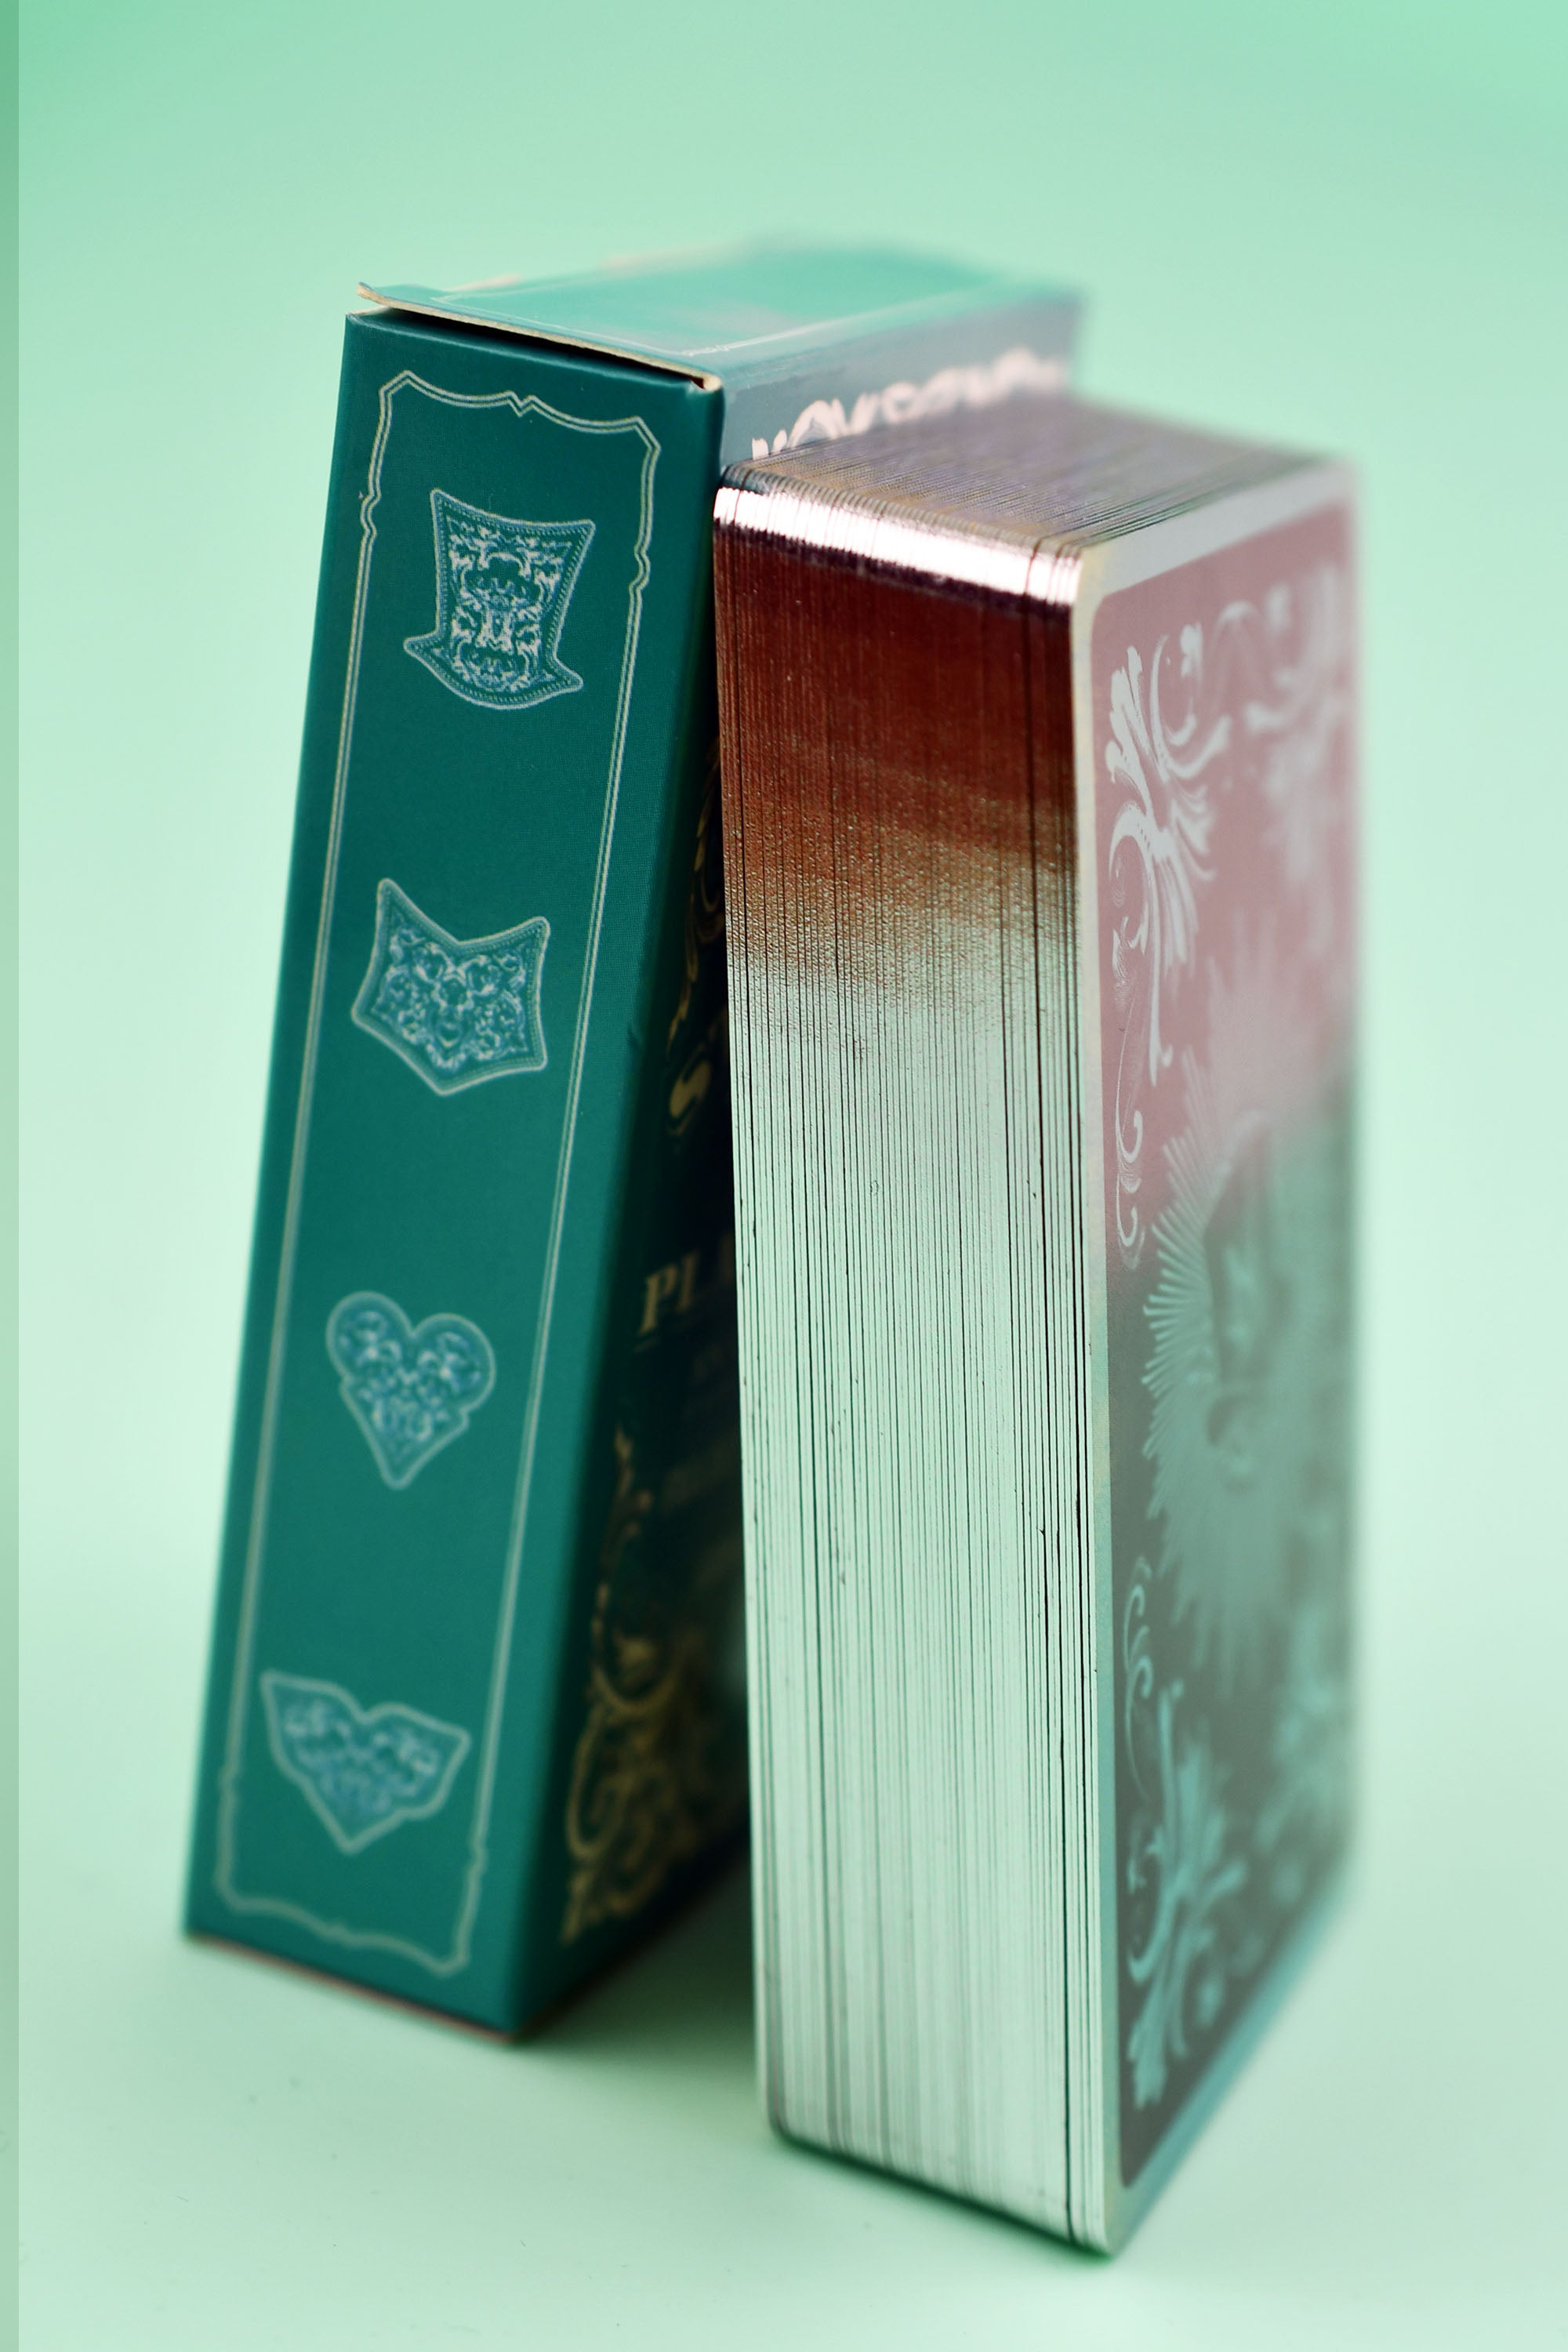 Storridge's Definitely Unmarked Playing Cards - Apocyan Edition